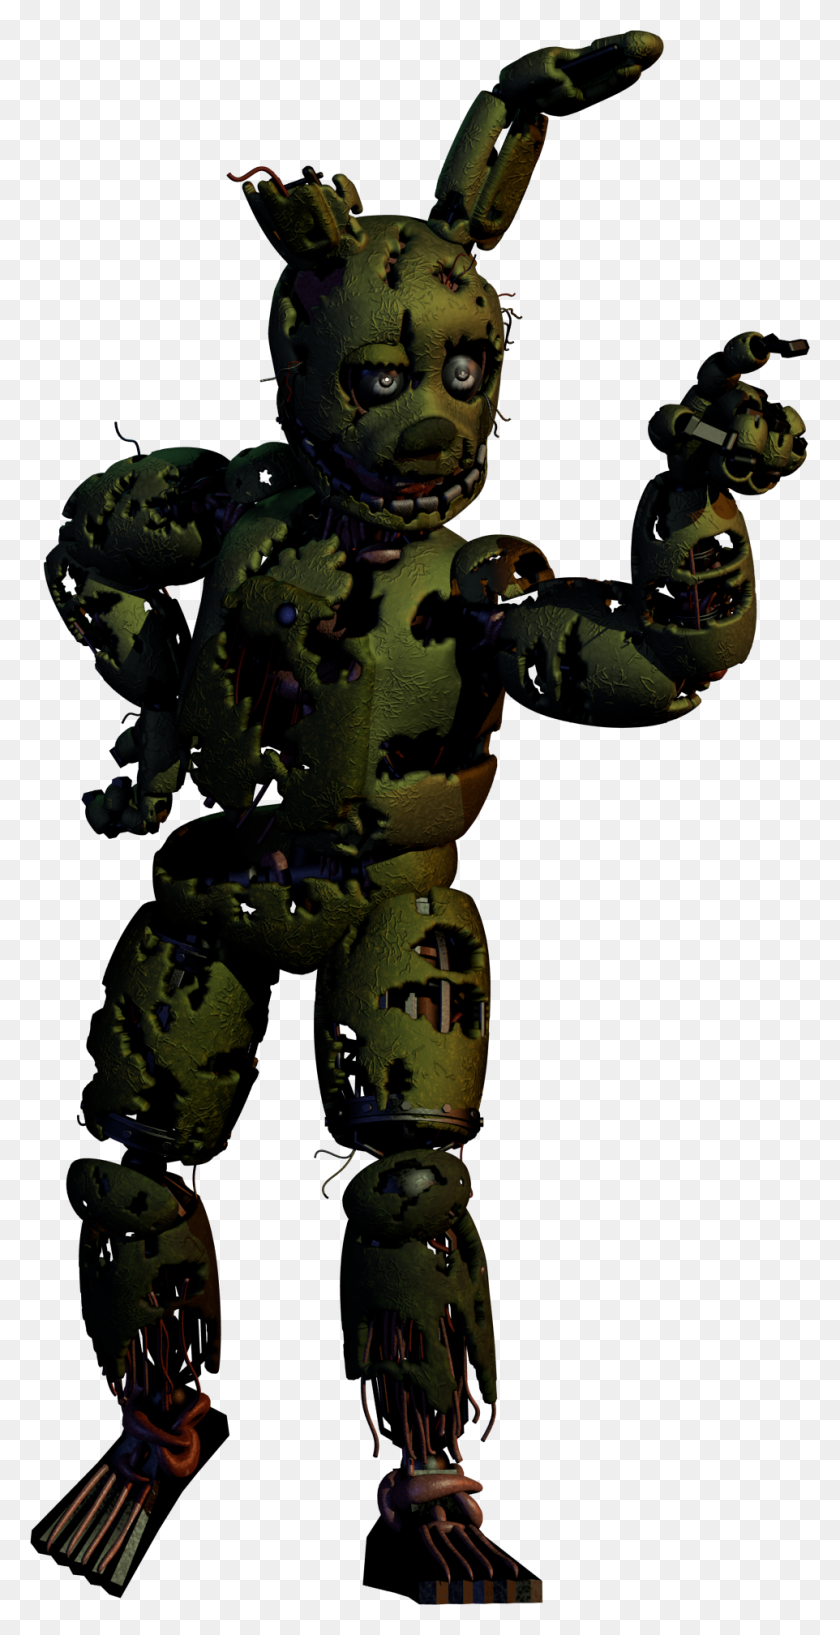 962x1943 Springtrap With King K Rool's Pose Fivenightsatfreddys - King K Rool PNG